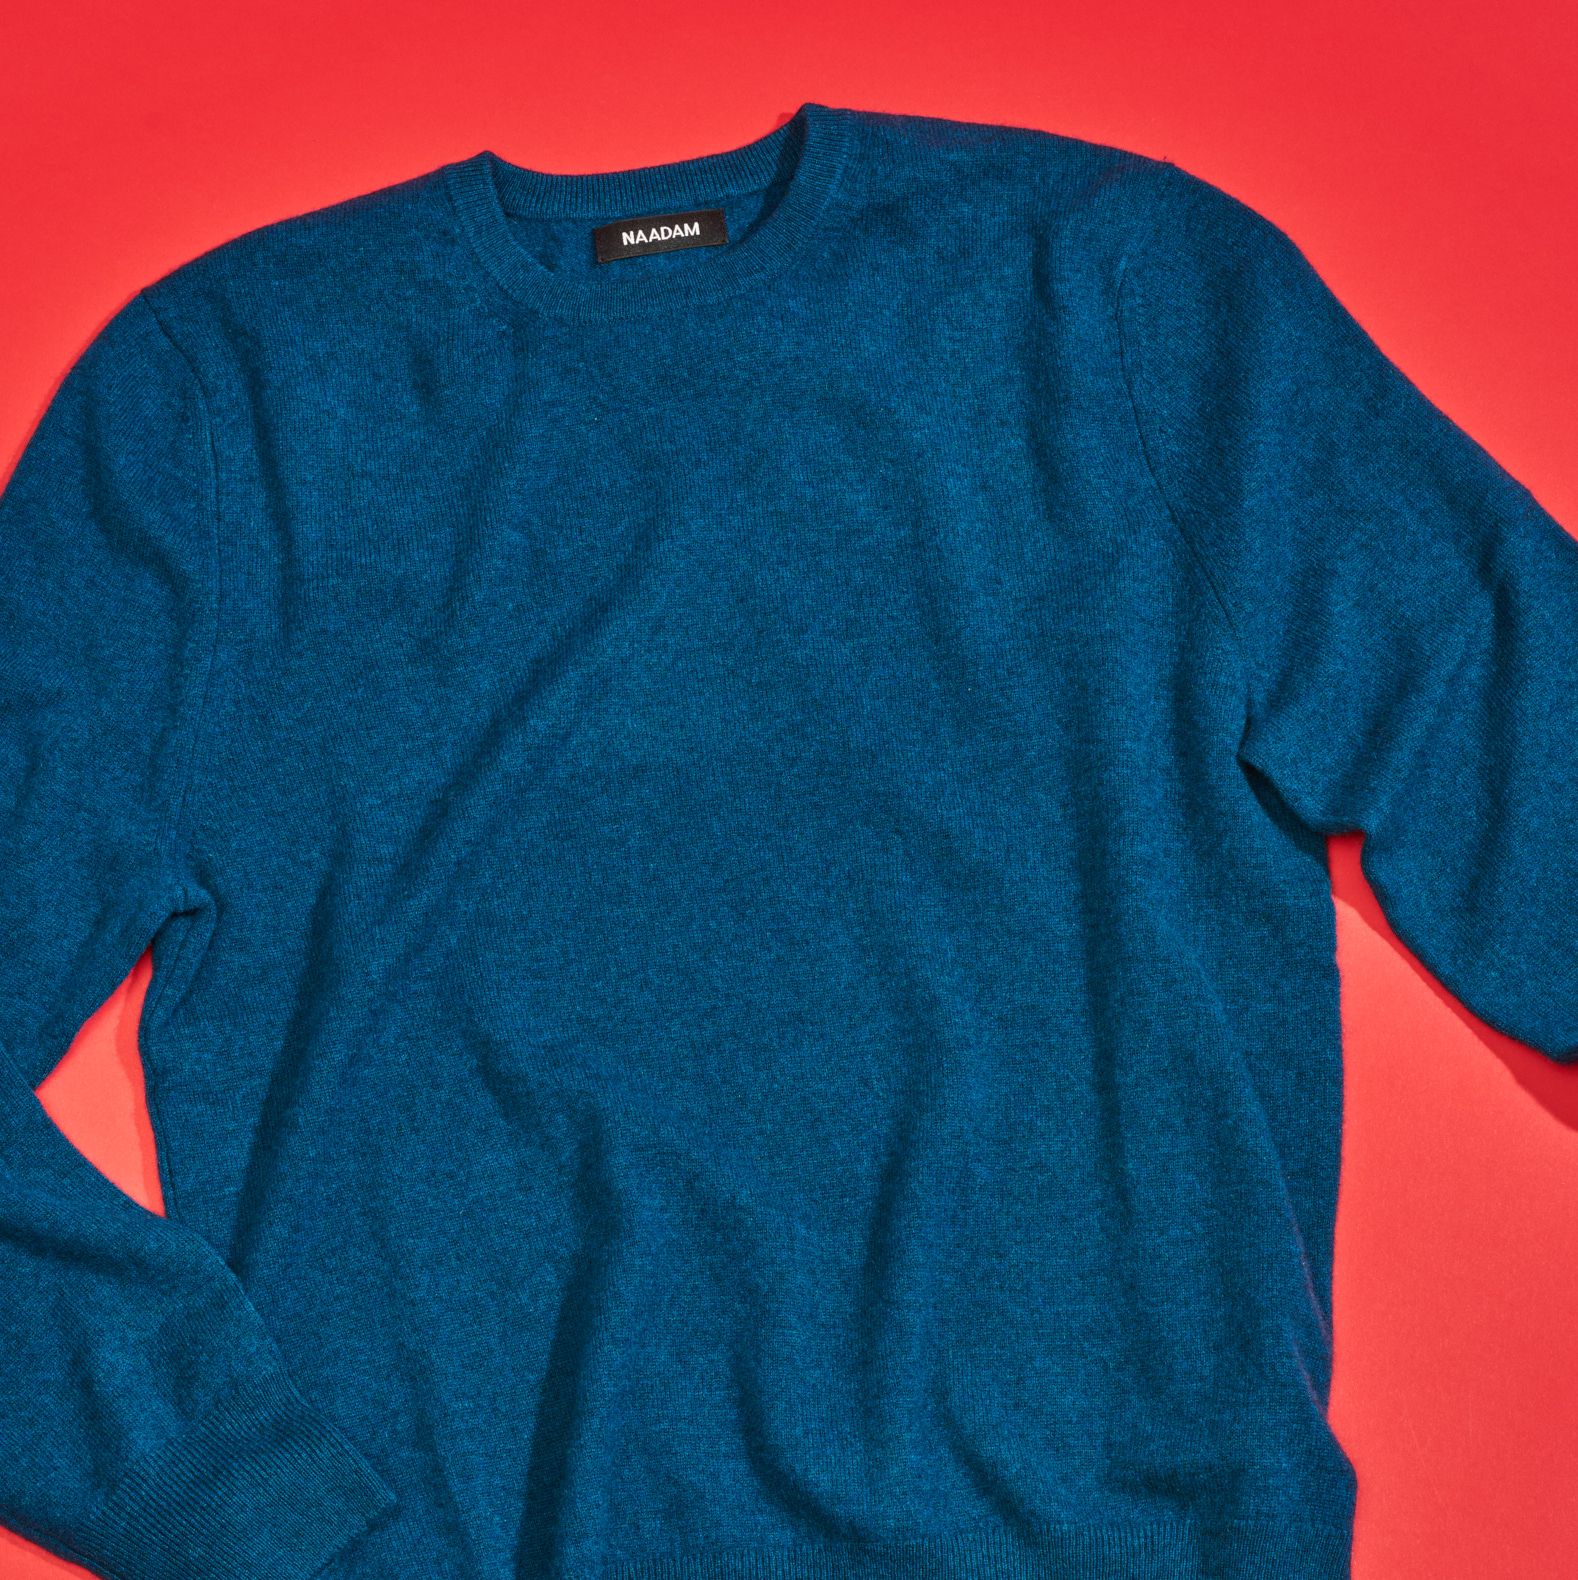 My Favorite Cashmere Sweater Is Less Than $100